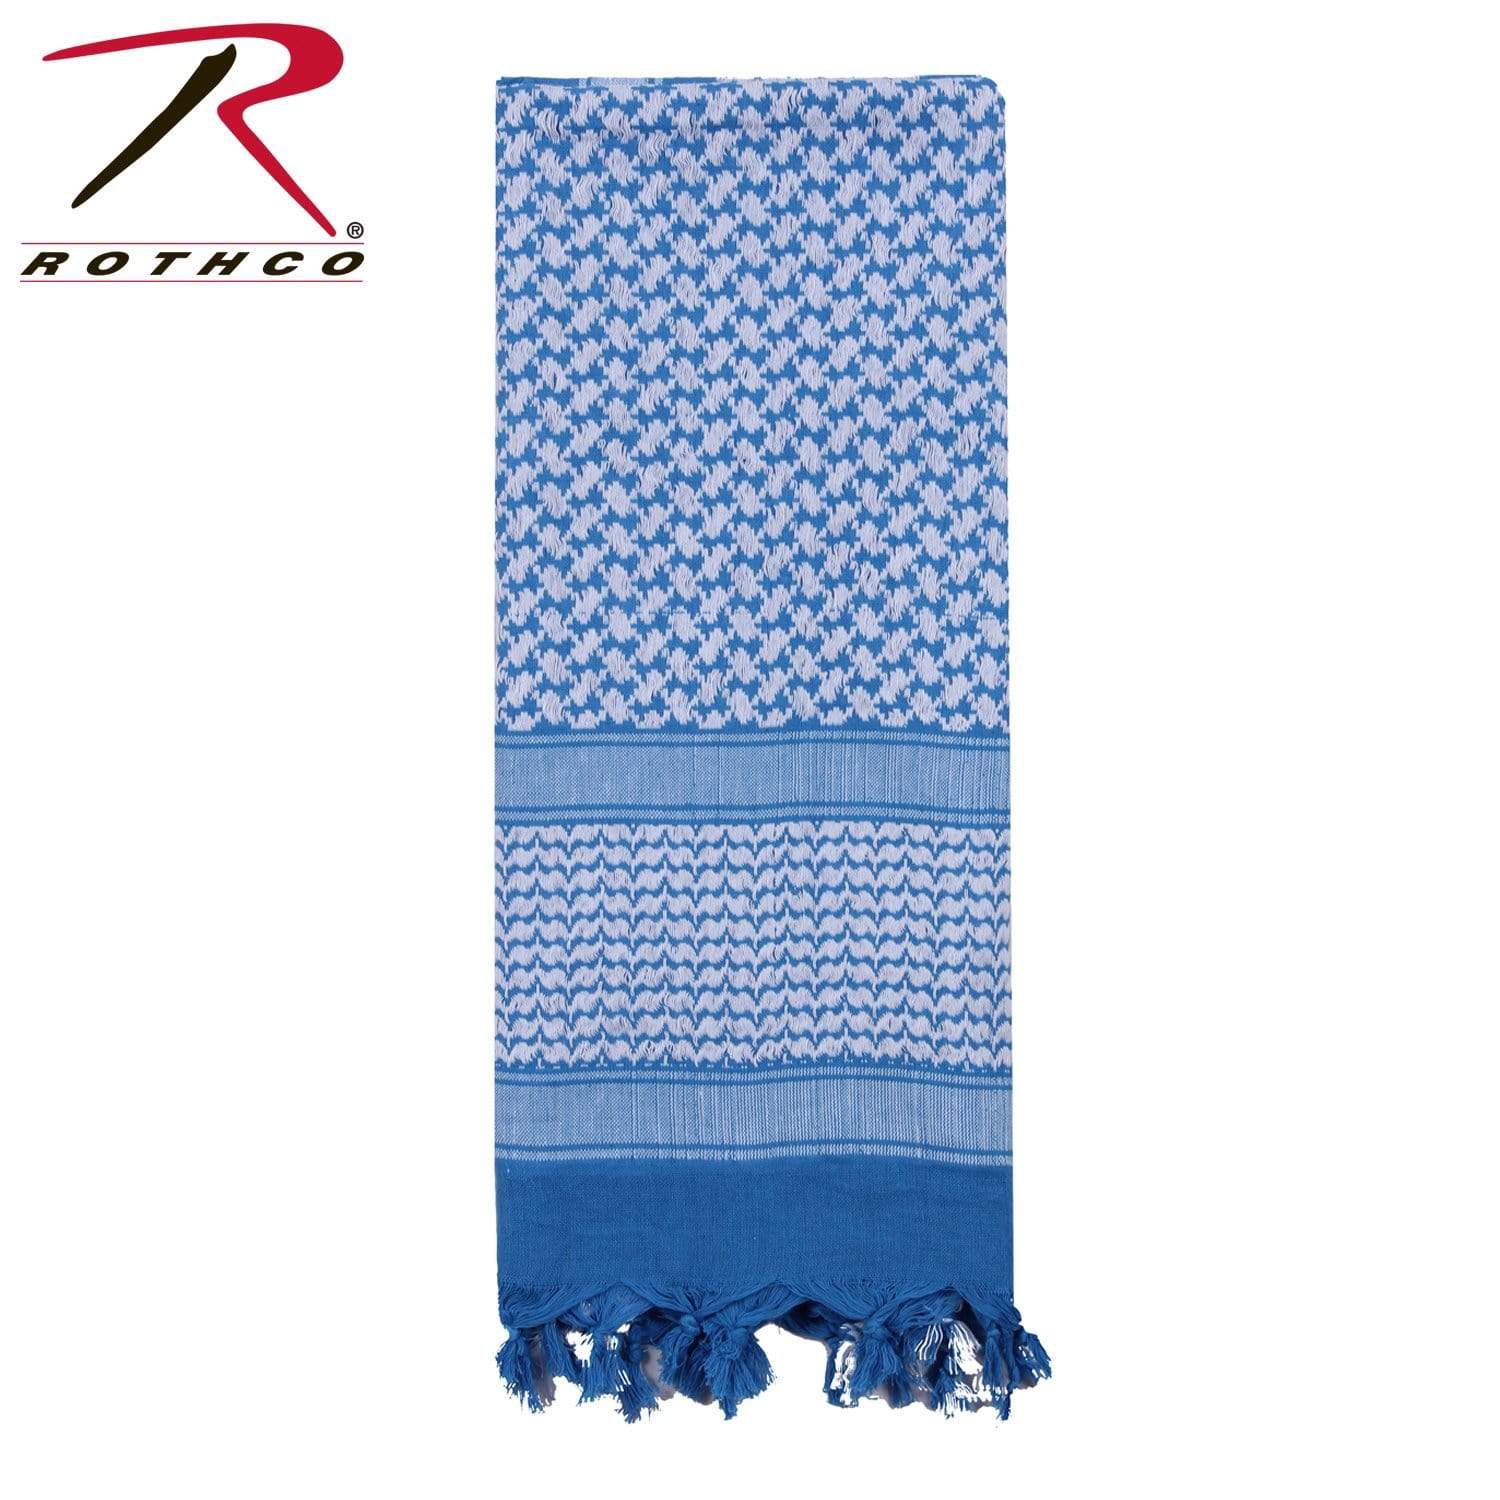 Rothco Shemagh Tactical Desert Keffiyeh Scarf - Light Blue - Eminent Paintball And Airsoft